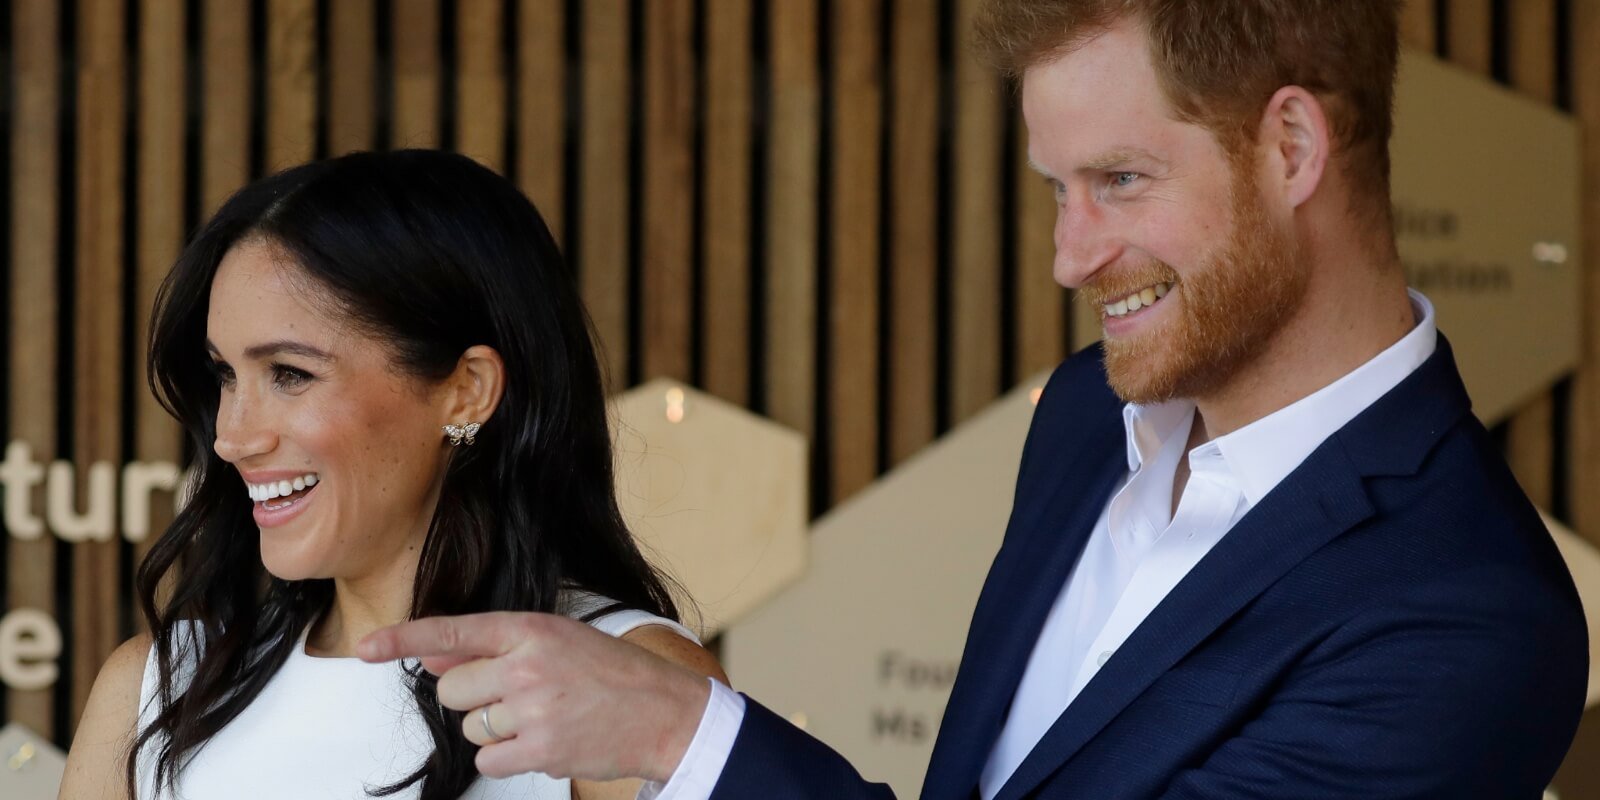 Meghan Markle and Prince Harry attend a ceremony at Taronga Zoo on October 16, 2018 in Sydney, Australia.